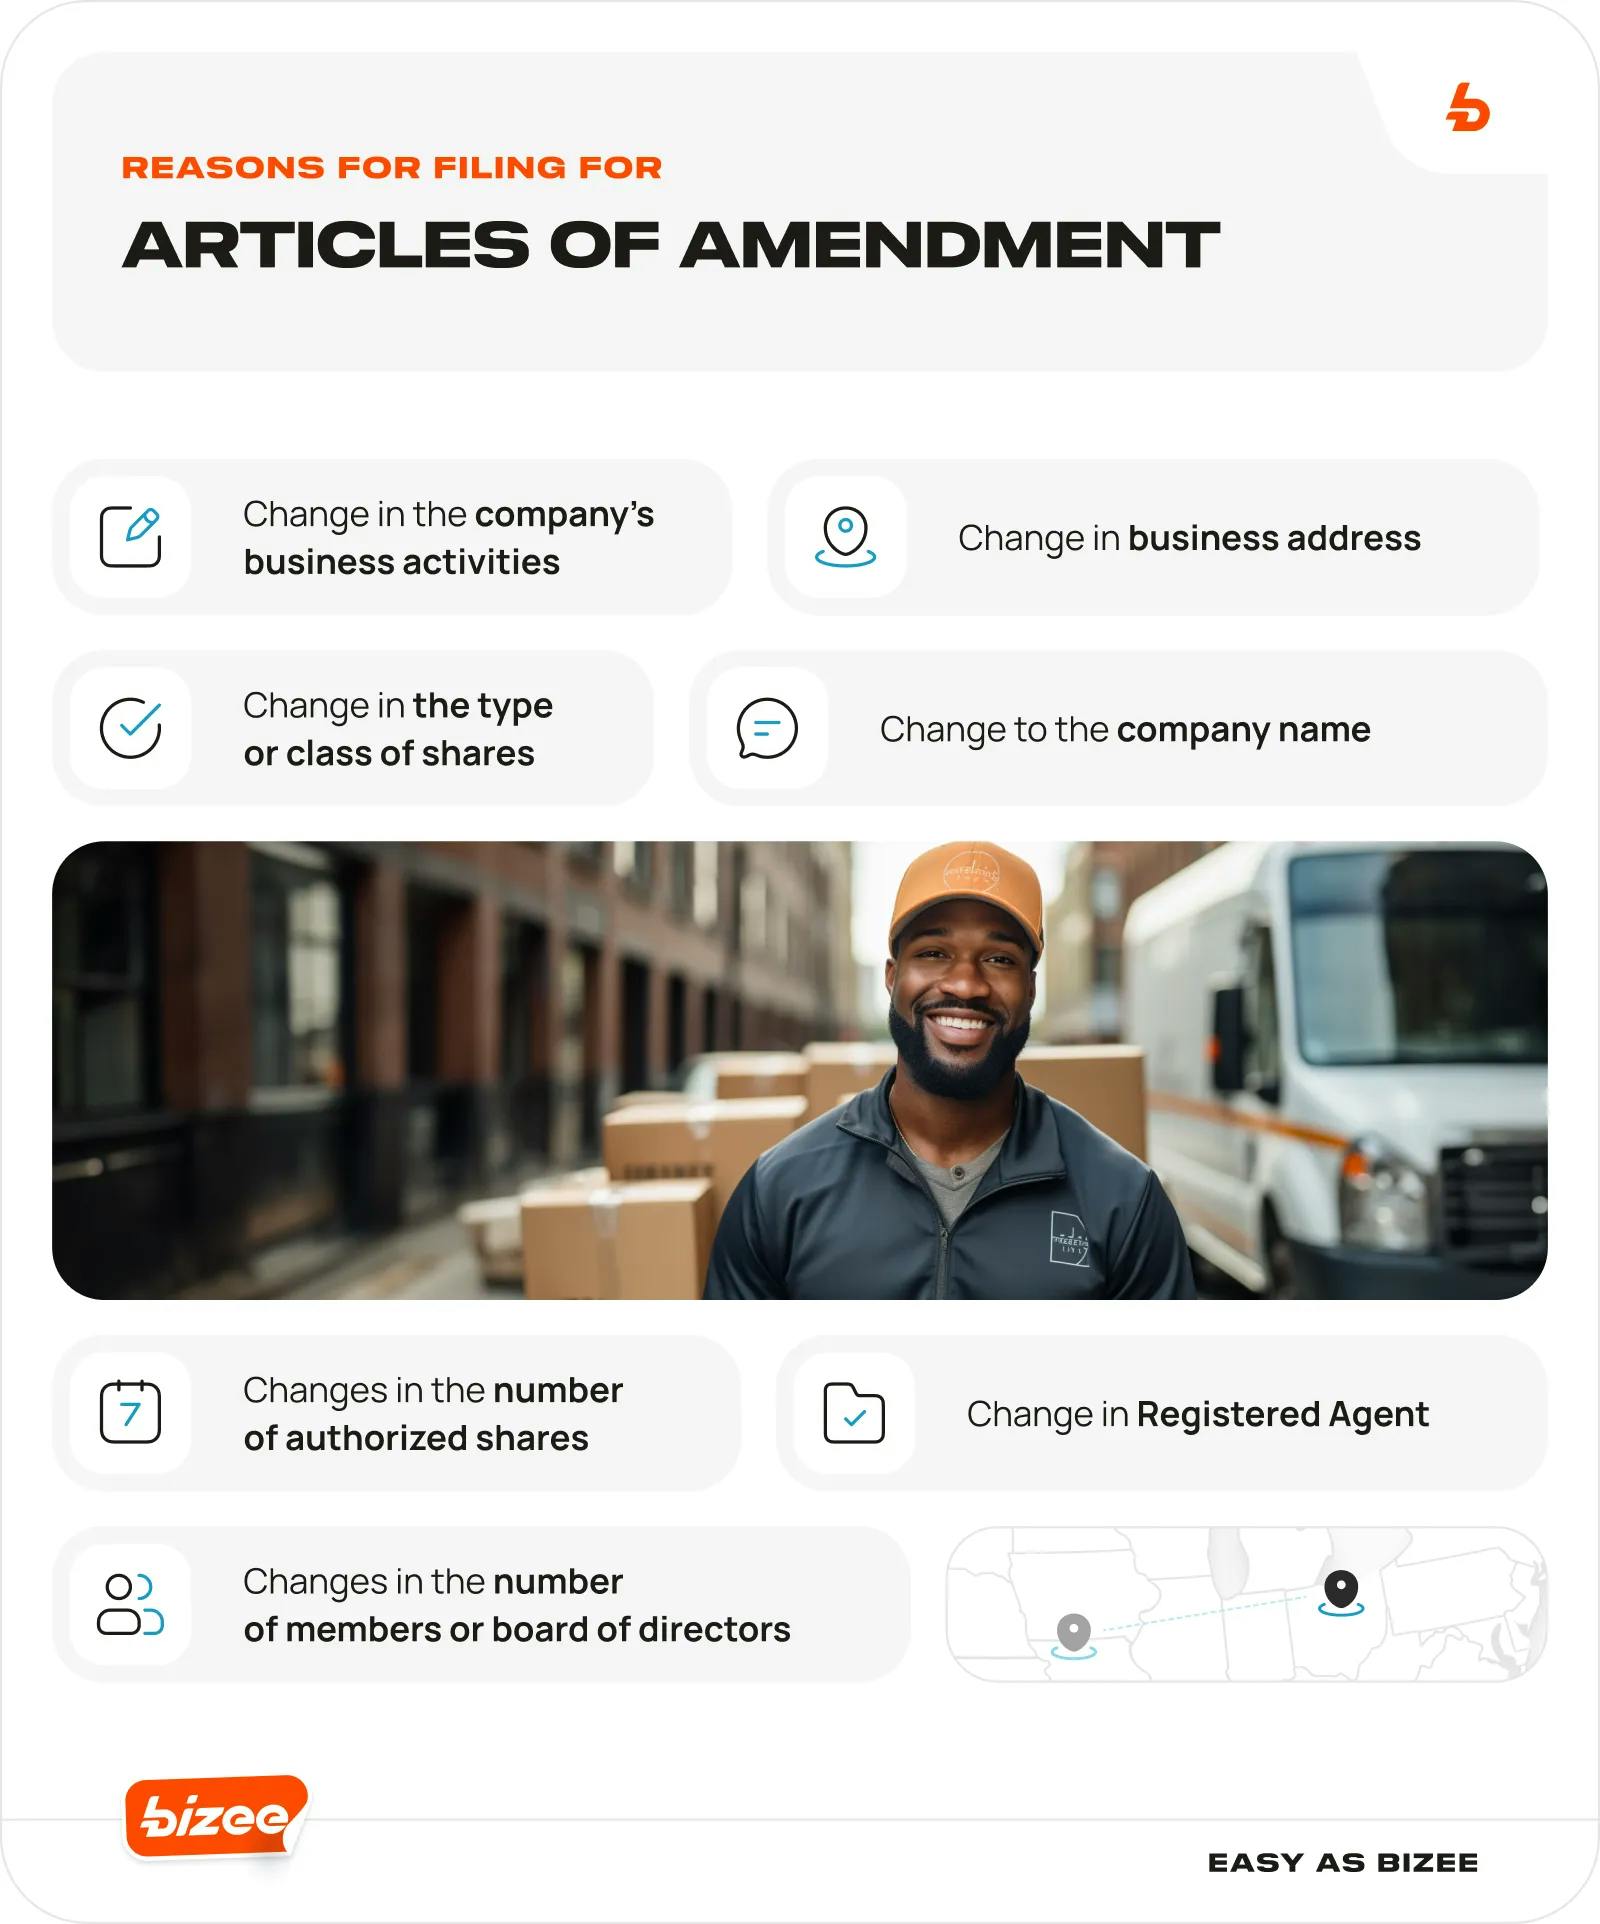 Reasons for Filing for Articles of Amendment